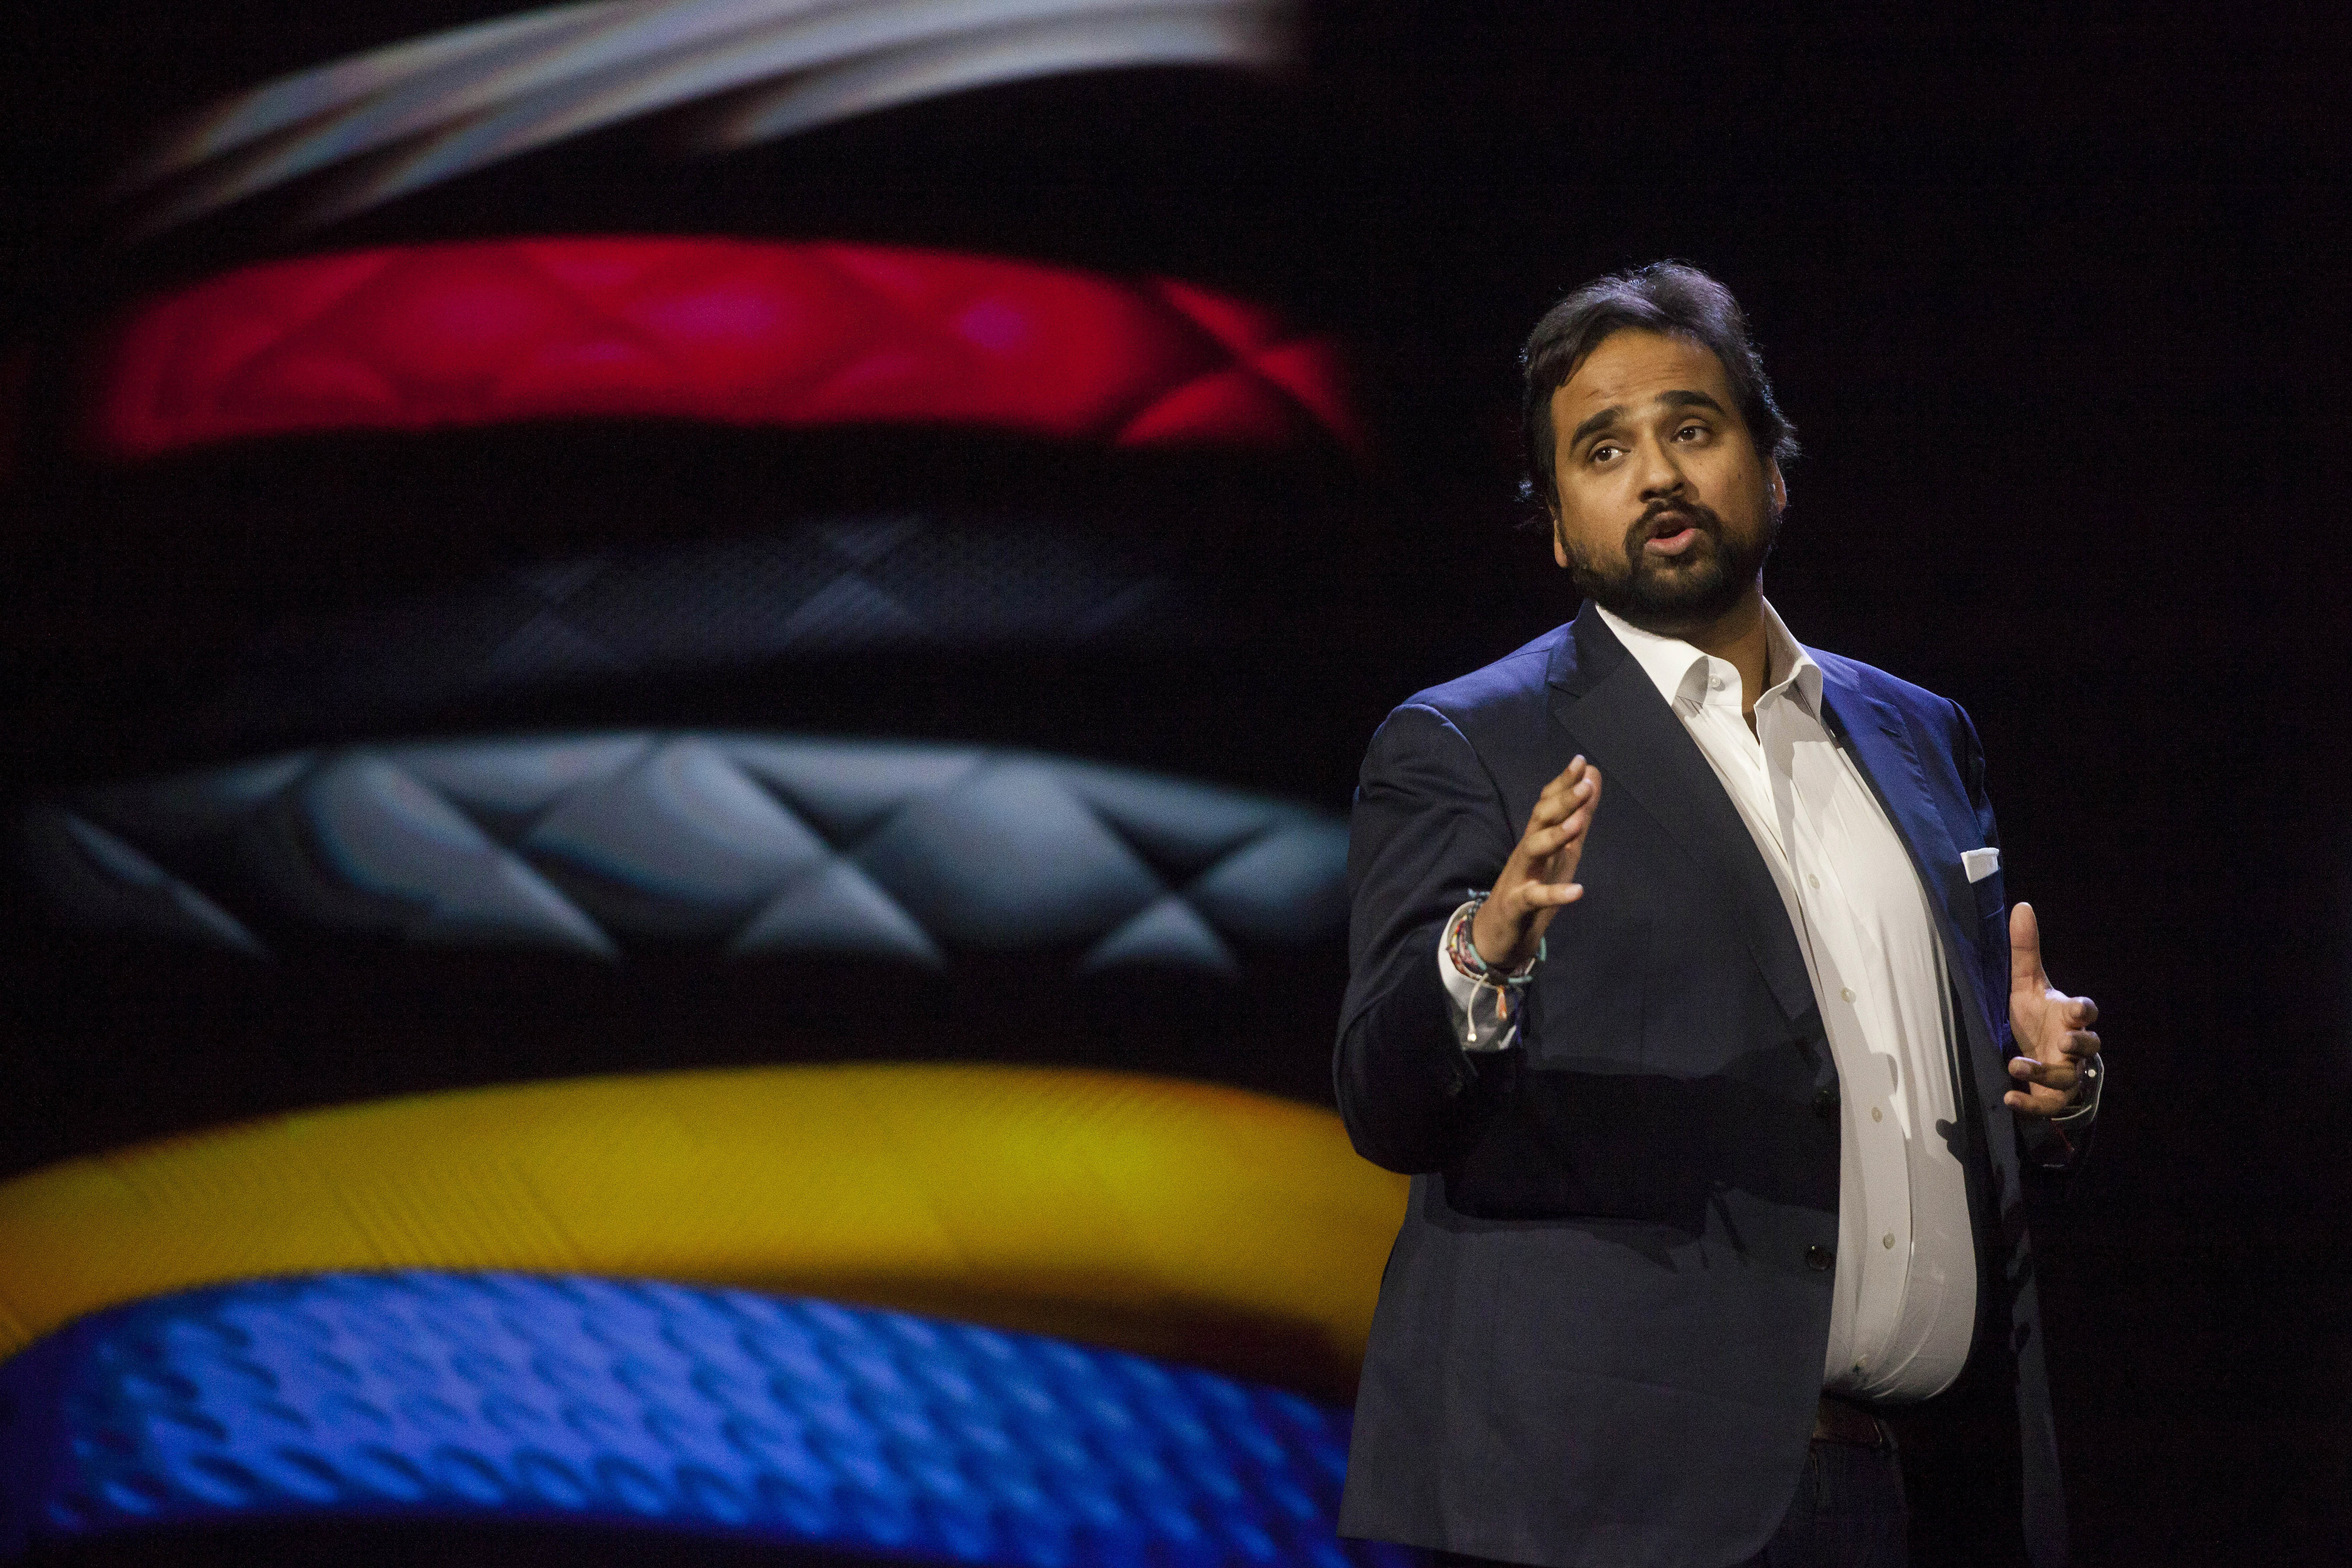 Hosain Rahman, chief executive officer of Jawbone Inc., speaks at a news conference during the 2015 Consumer Electronics Show (CES) in Las Vegas, Nevada, U.S., on Monday, Jan. 5, 2015. (Bloomberg—Bloomberg via Getty Images)